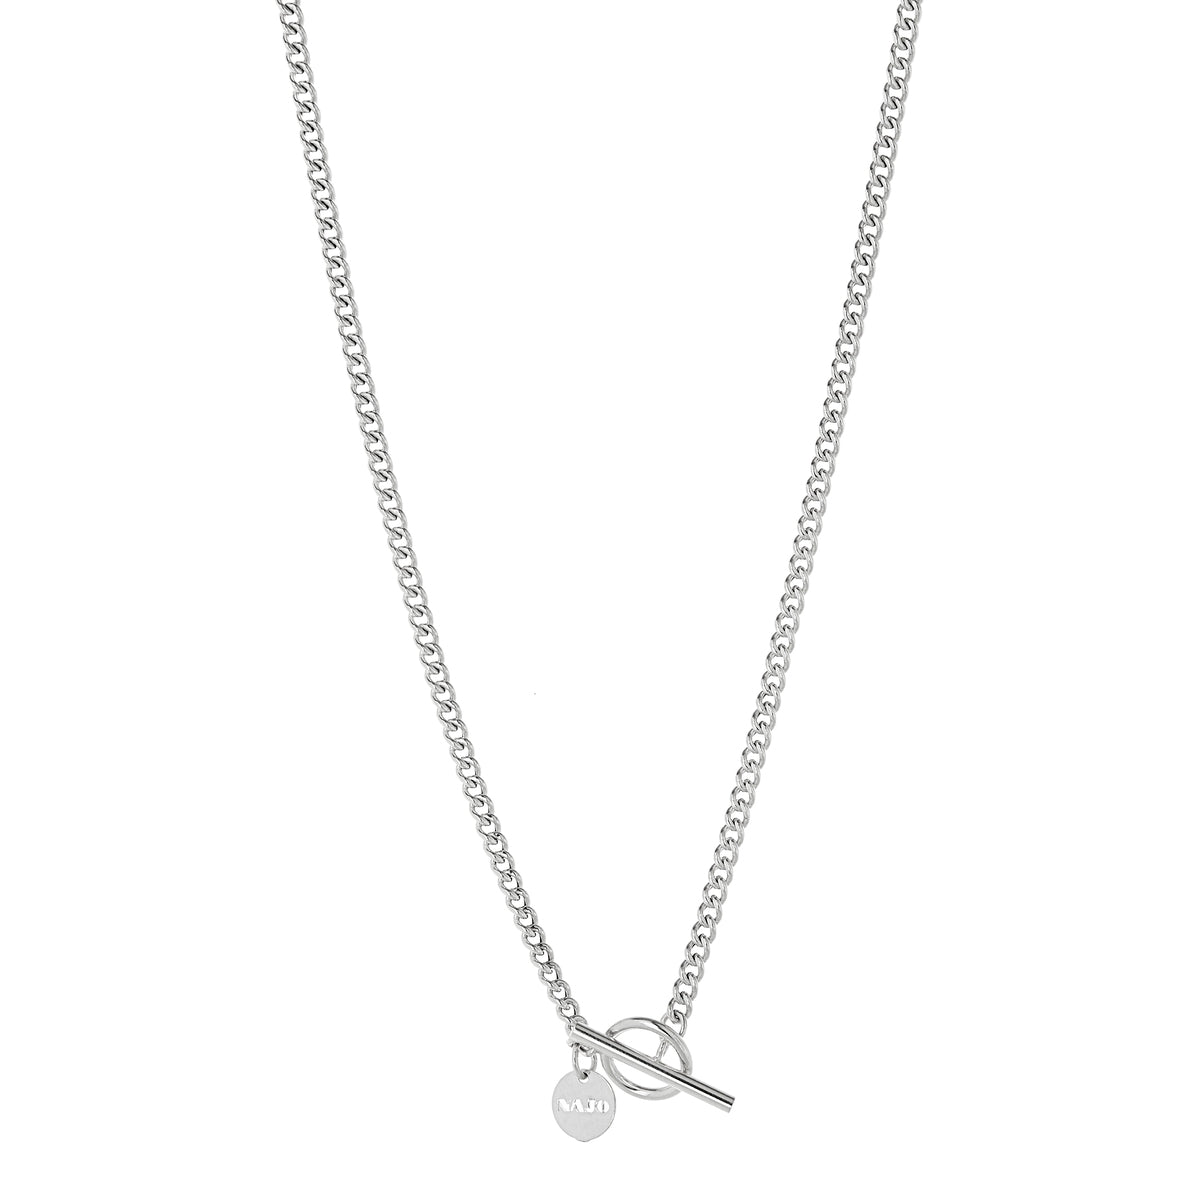 Najo N6758 Curb T-Bar Silver Necklace